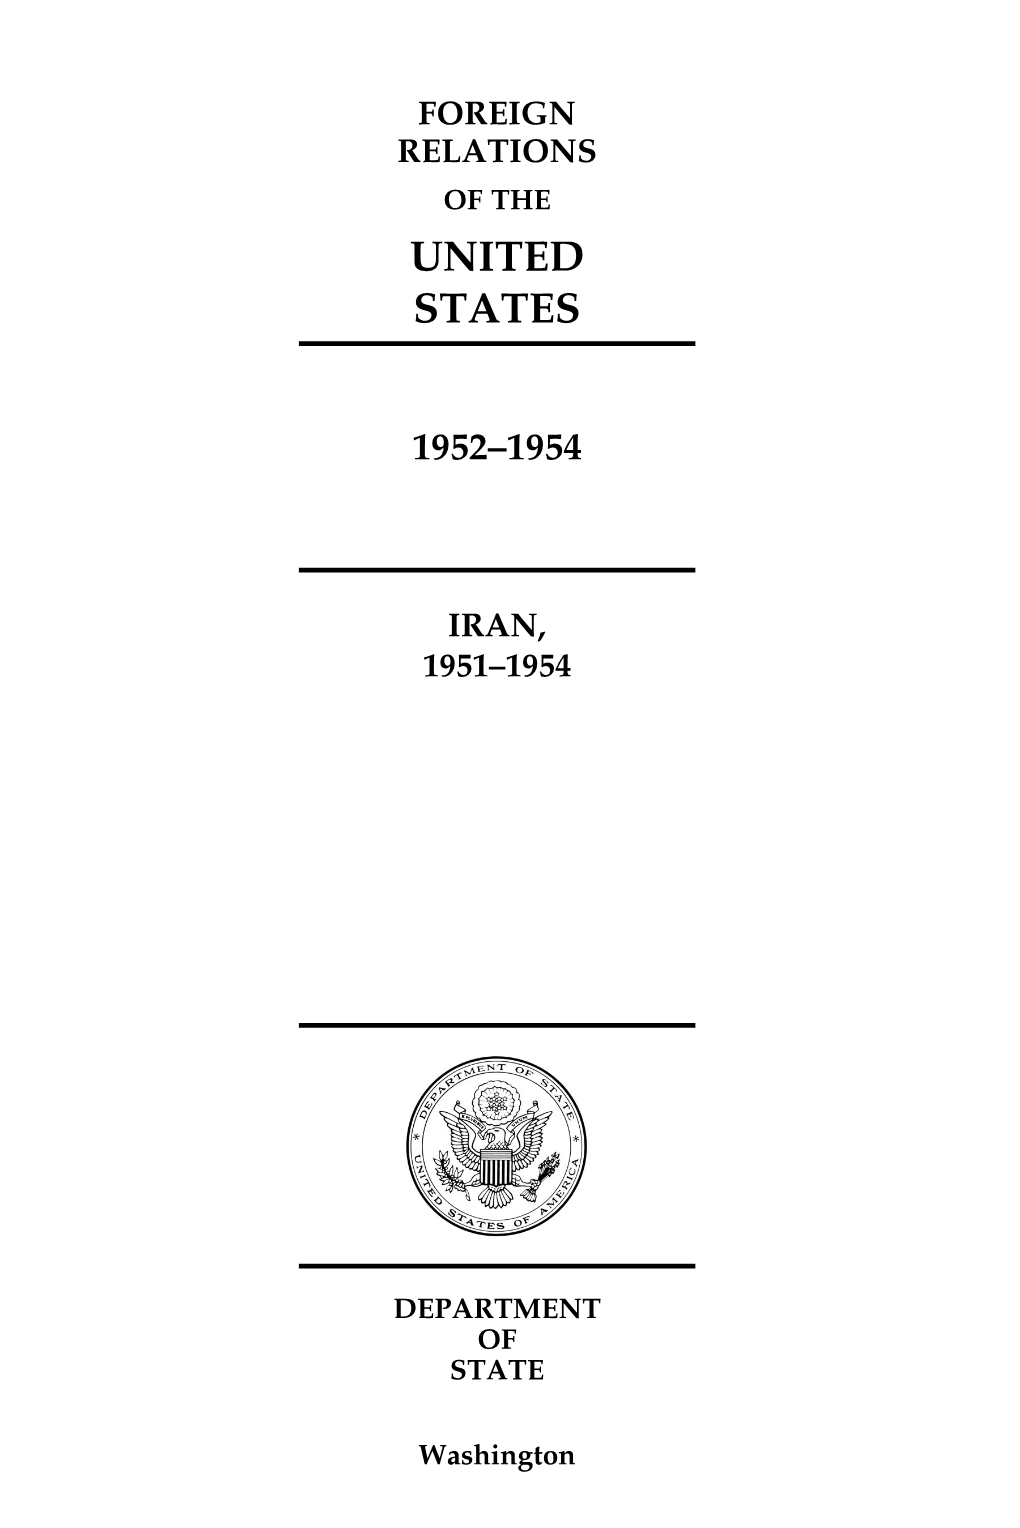 Foreign Relations of the United States 1952–1954, Iran, 1951–1954